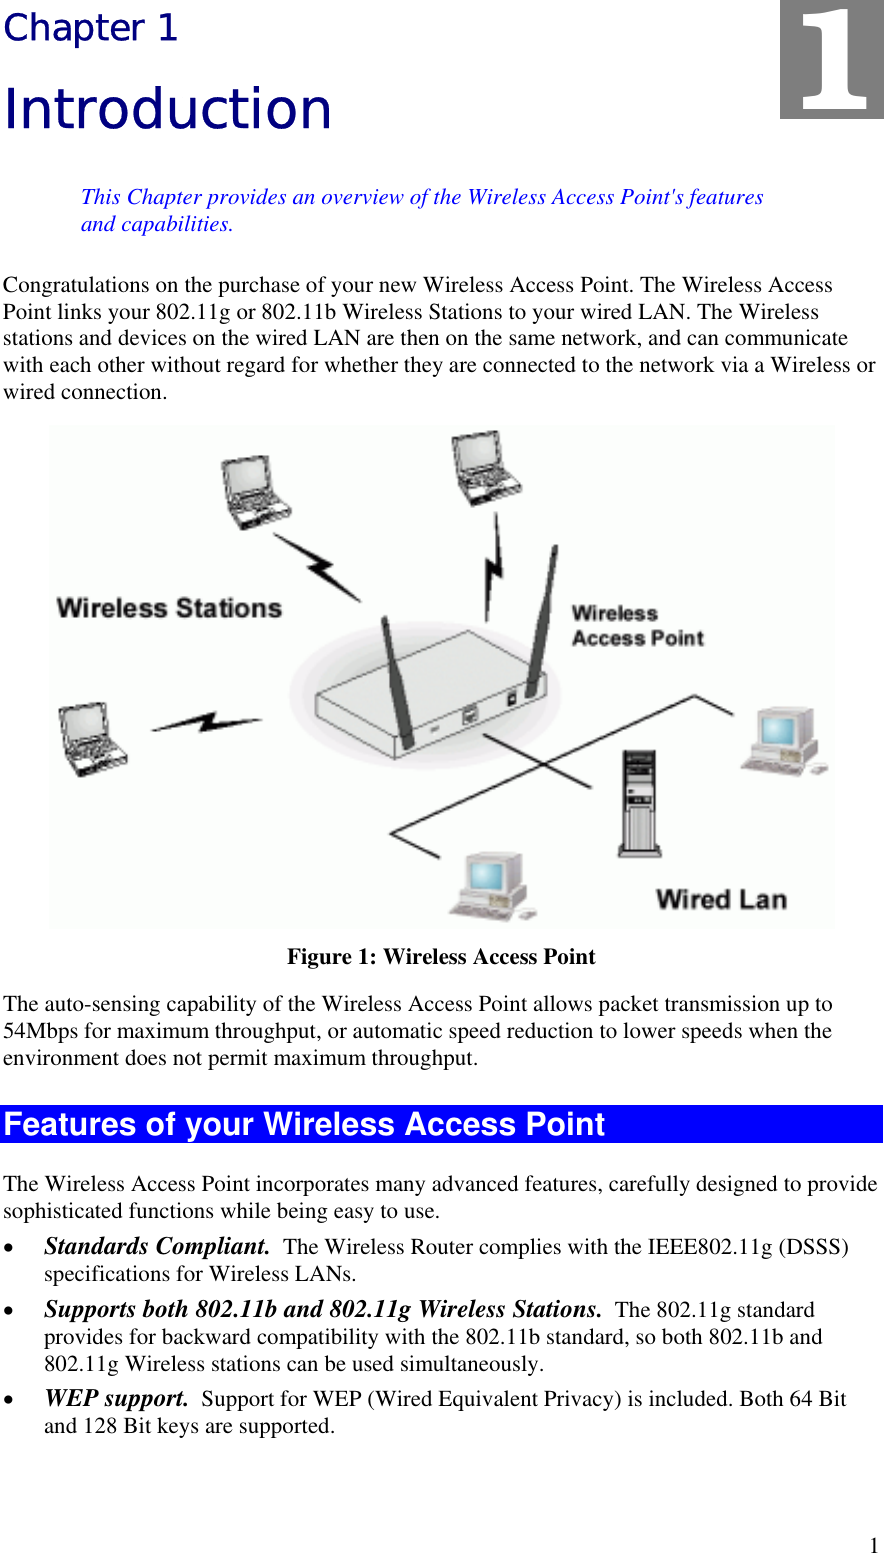   1 Chapter 1 Introduction This Chapter provides an overview of the Wireless Access Point&apos;s features and capabilities. Congratulations on the purchase of your new Wireless Access Point. The Wireless Access Point links your 802.11g or 802.11b Wireless Stations to your wired LAN. The Wireless stations and devices on the wired LAN are then on the same network, and can communicate with each other without regard for whether they are connected to the network via a Wireless or wired connection.  Figure 1: Wireless Access Point The auto-sensing capability of the Wireless Access Point allows packet transmission up to 54Mbps for maximum throughput, or automatic speed reduction to lower speeds when the environment does not permit maximum throughput. Features of your Wireless Access Point The Wireless Access Point incorporates many advanced features, carefully designed to provide sophisticated functions while being easy to use. •  Standards Compliant.  The Wireless Router complies with the IEEE802.11g (DSSS) specifications for Wireless LANs. •  Supports both 802.11b and 802.11g Wireless Stations.  The 802.11g standard provides for backward compatibility with the 802.11b standard, so both 802.11b and 802.11g Wireless stations can be used simultaneously. •  WEP support.  Support for WEP (Wired Equivalent Privacy) is included. Both 64 Bit and 128 Bit keys are supported. 1 